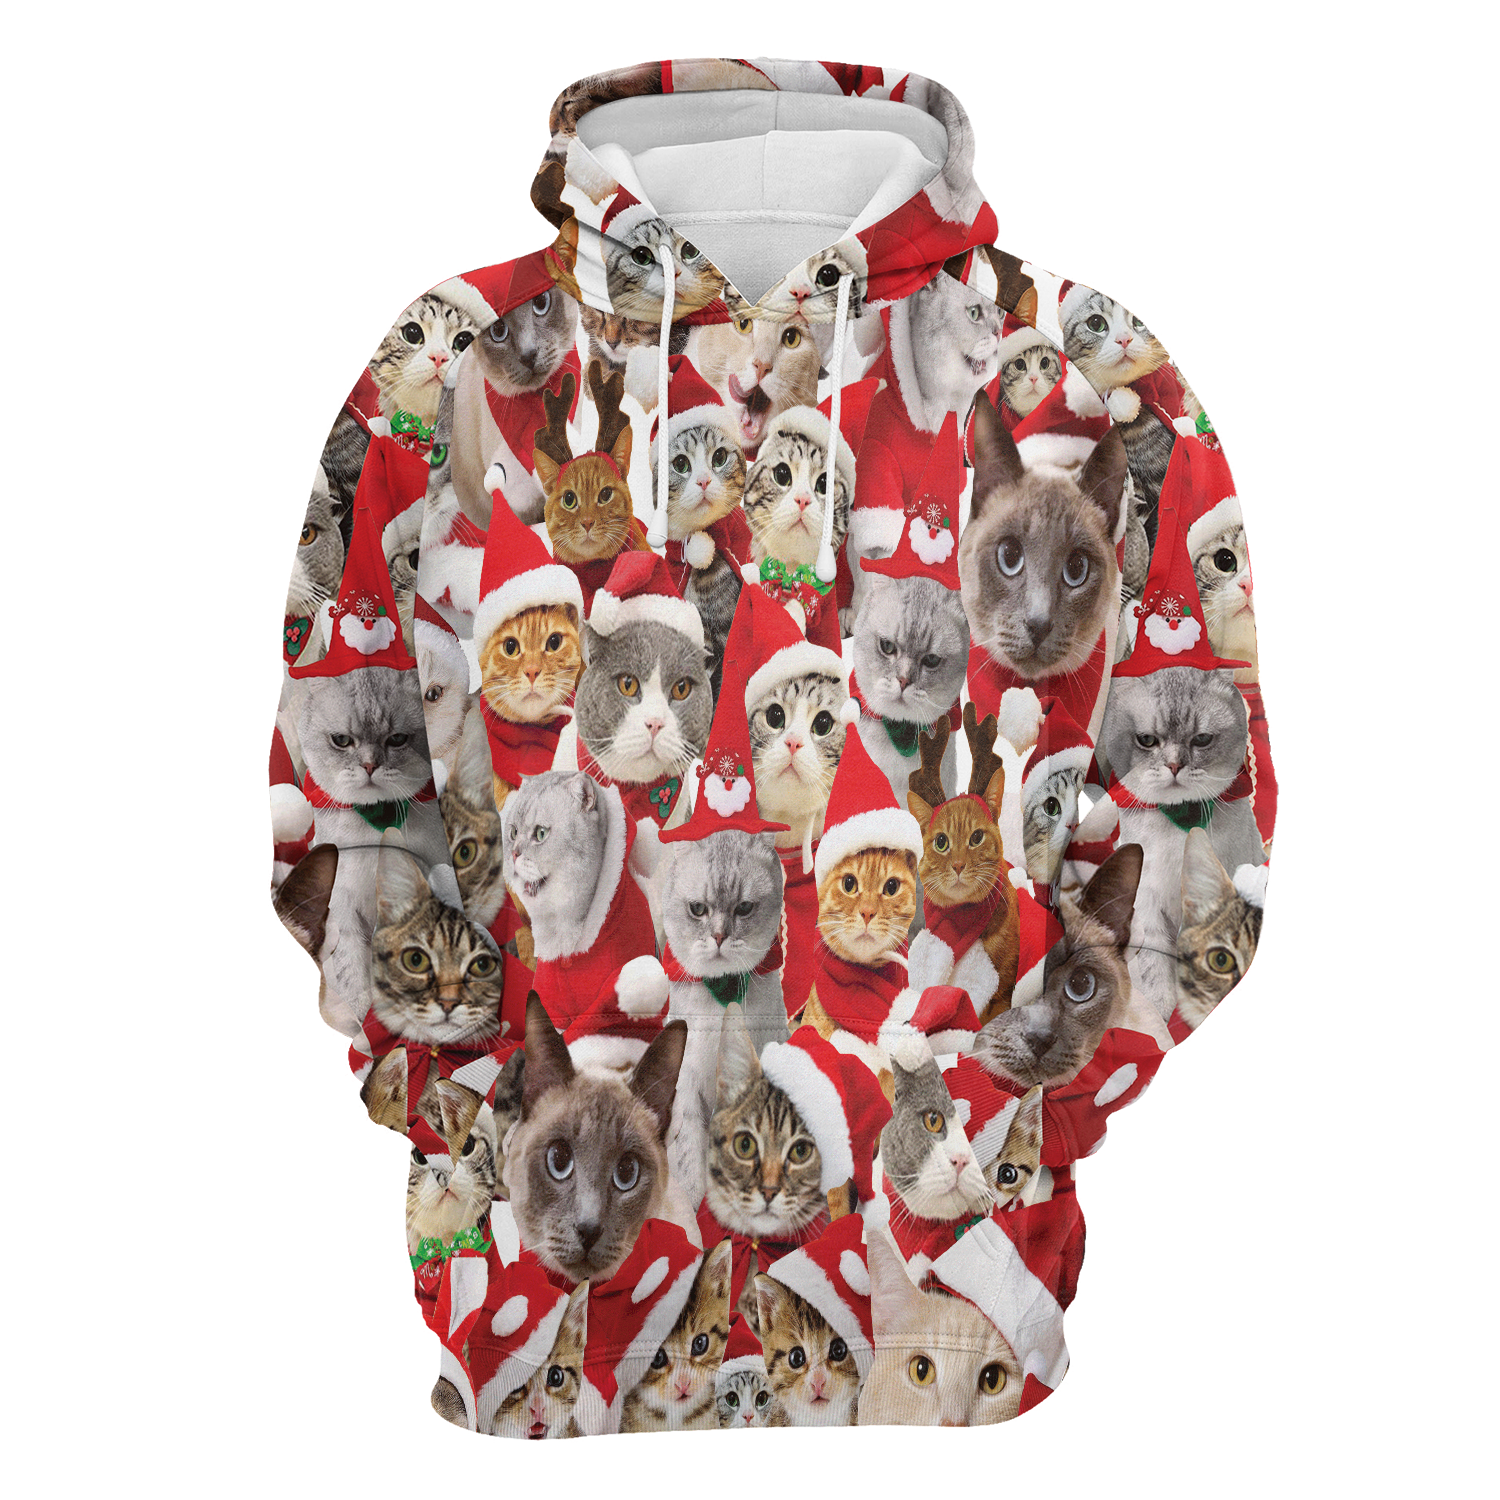 Lovely Cats & Christmas hat Pullover Premium Hoodie, Perfect Outfit For Men And Women On Christmas New Year Autumn Winter